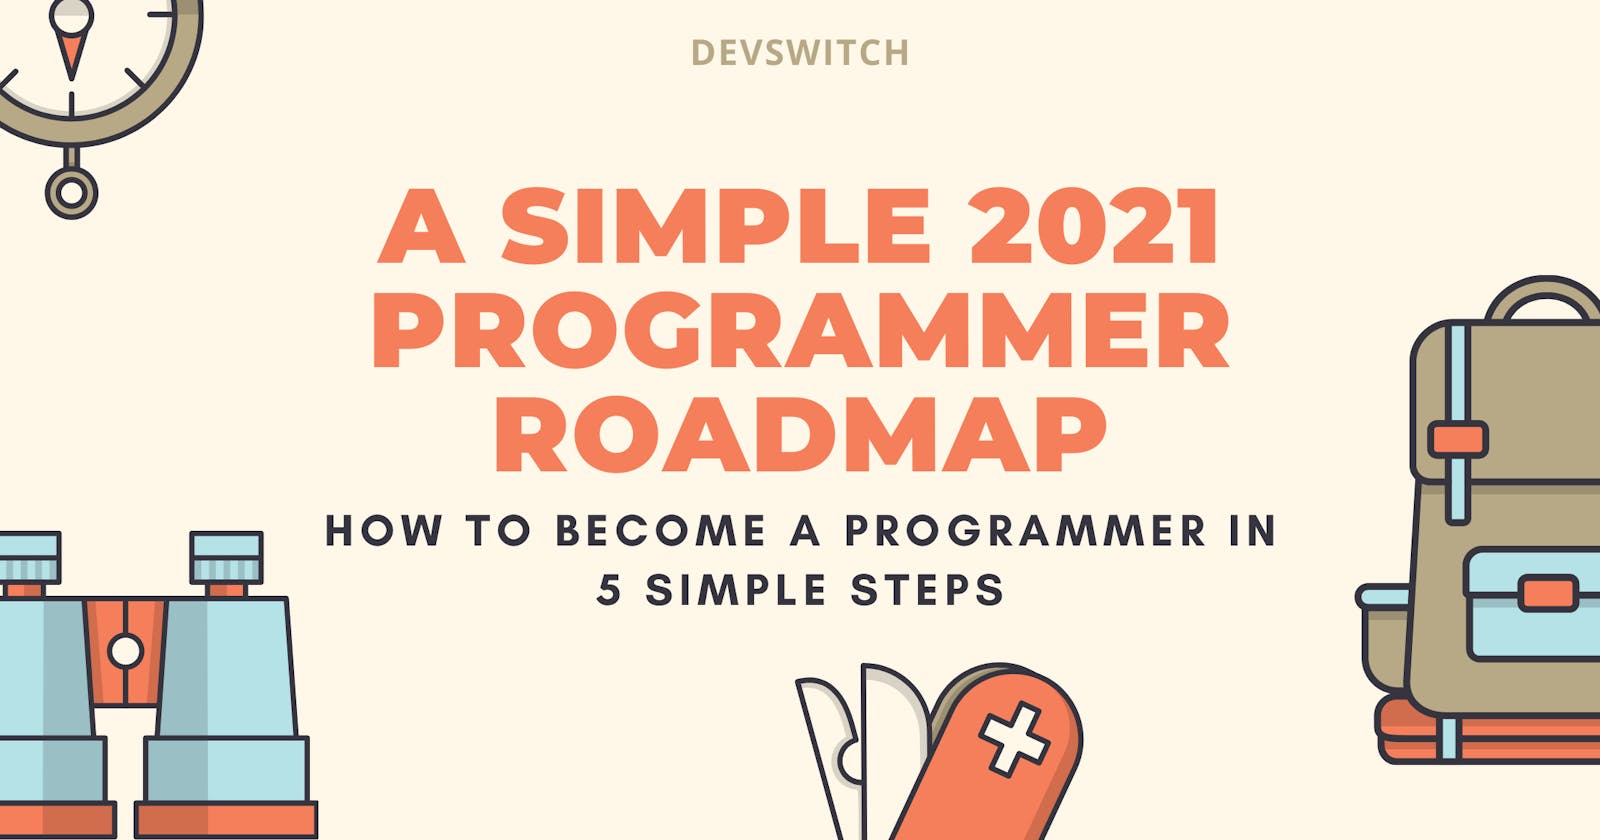 A Simple 5-Step Roadmap to Becoming a Programmer in 2021